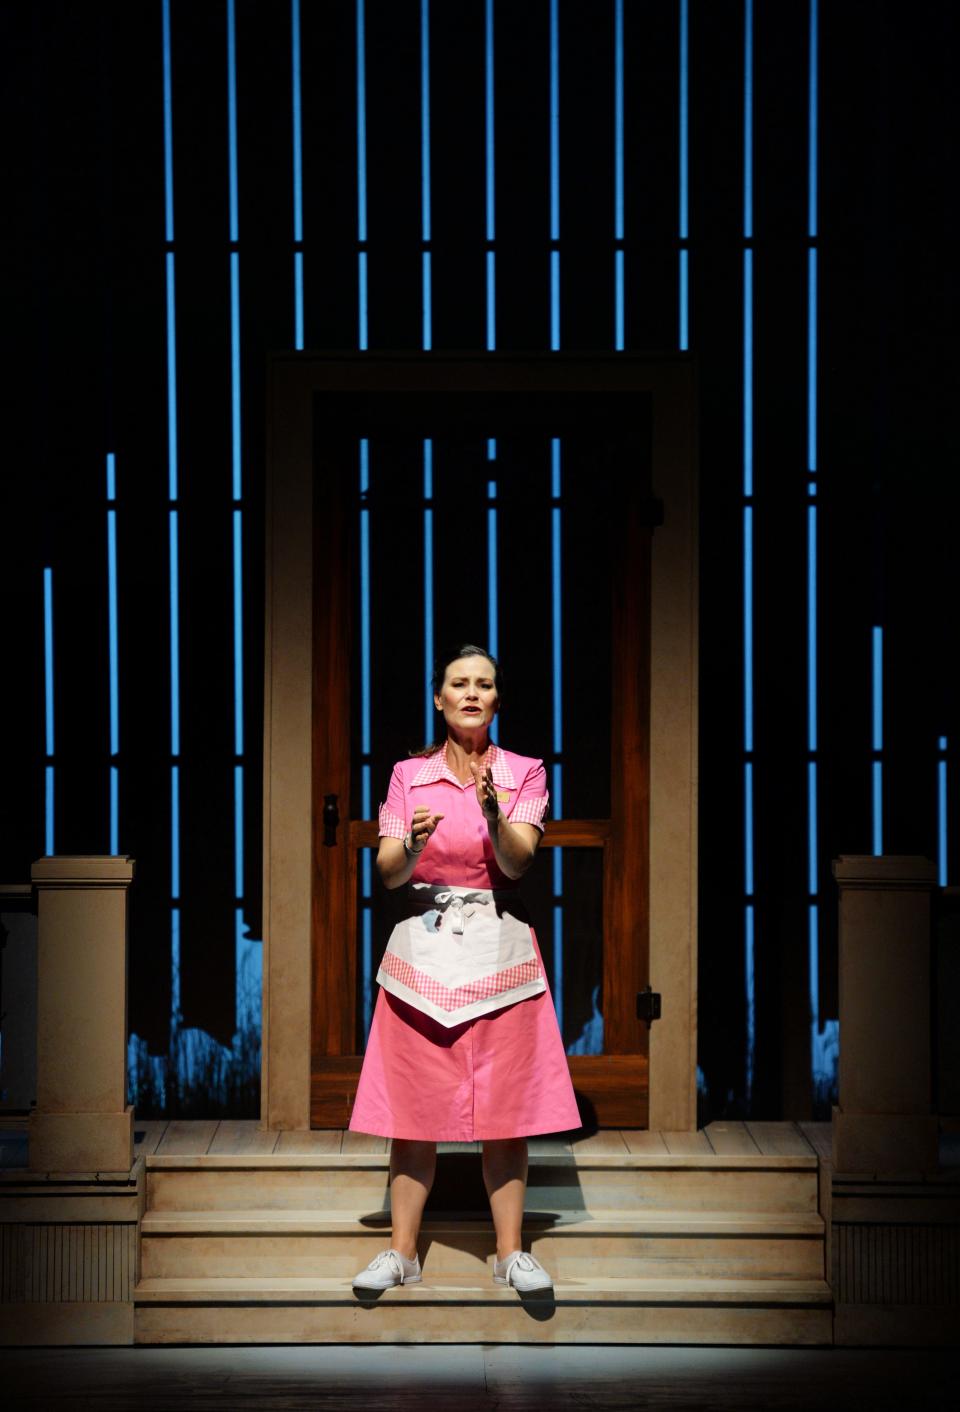 Elise Quagliata as Ginny in "A Thousand Acres," a new opera in the Des Moines Metro Opera's 50th anniversary season. The work is based off of the Pulitzer Prize-winning novel from Jane Smiley.